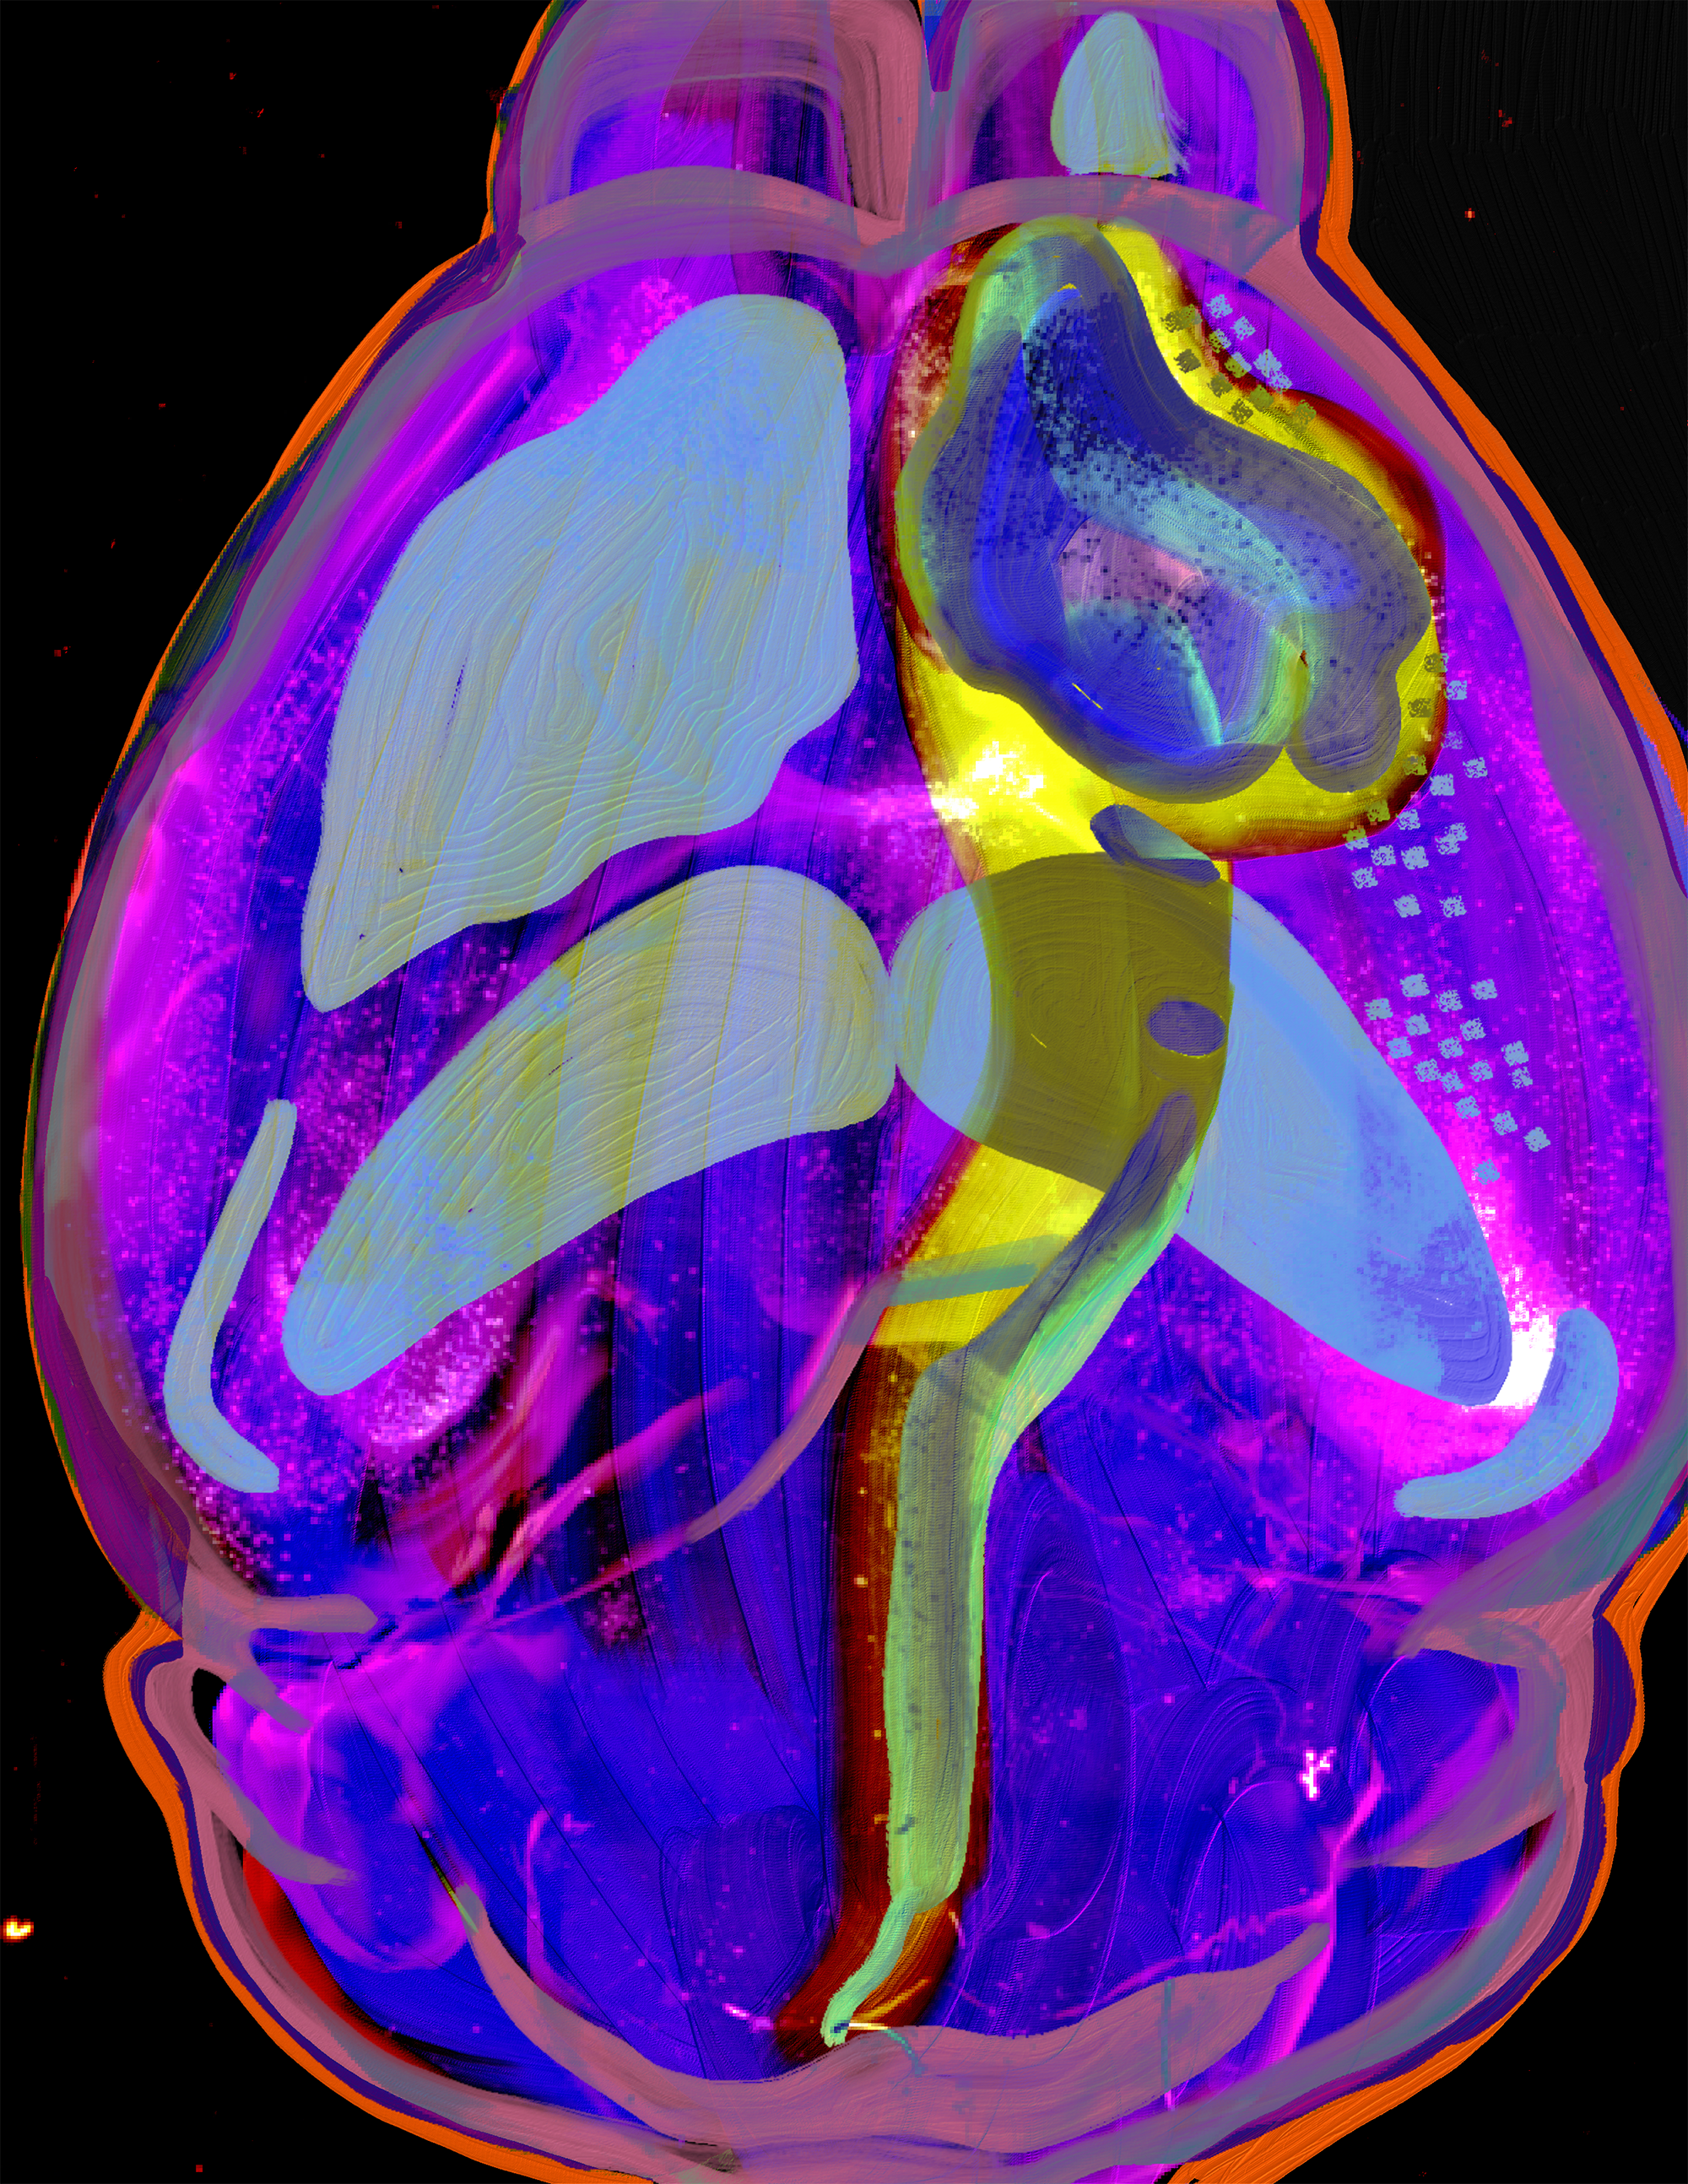 An artistic interpretation of a two-dimensional brain representation generated by José Maldonado through whole-brain imaging carried out at the Vanderbilt Neurovisualization Lab. The illustration was made by the author of the article, Kendra H. Oliver.